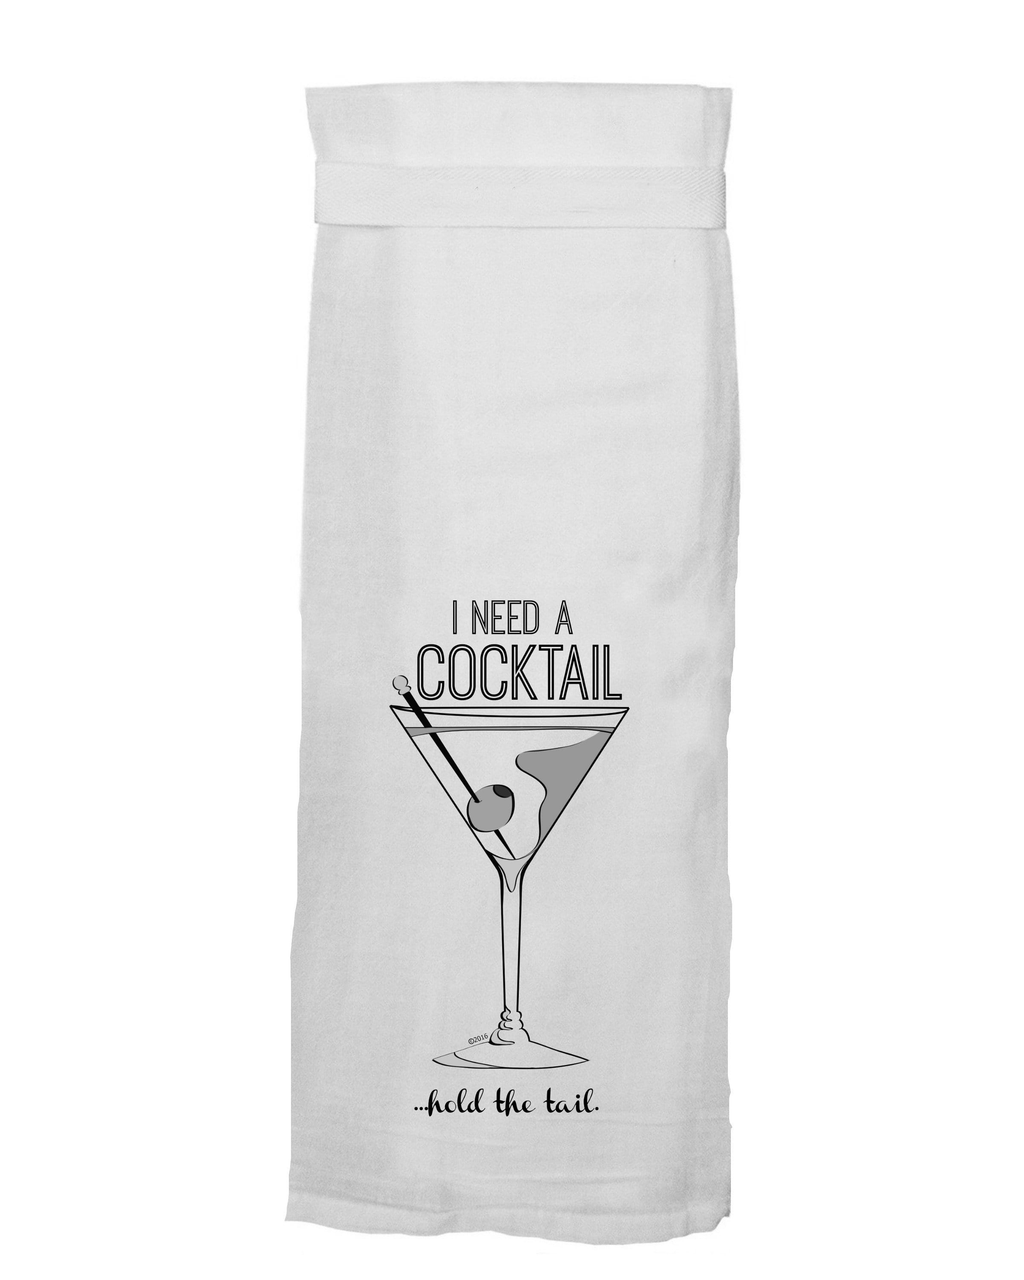 I Need A Cocktail, Hold The Tail Tea Towel